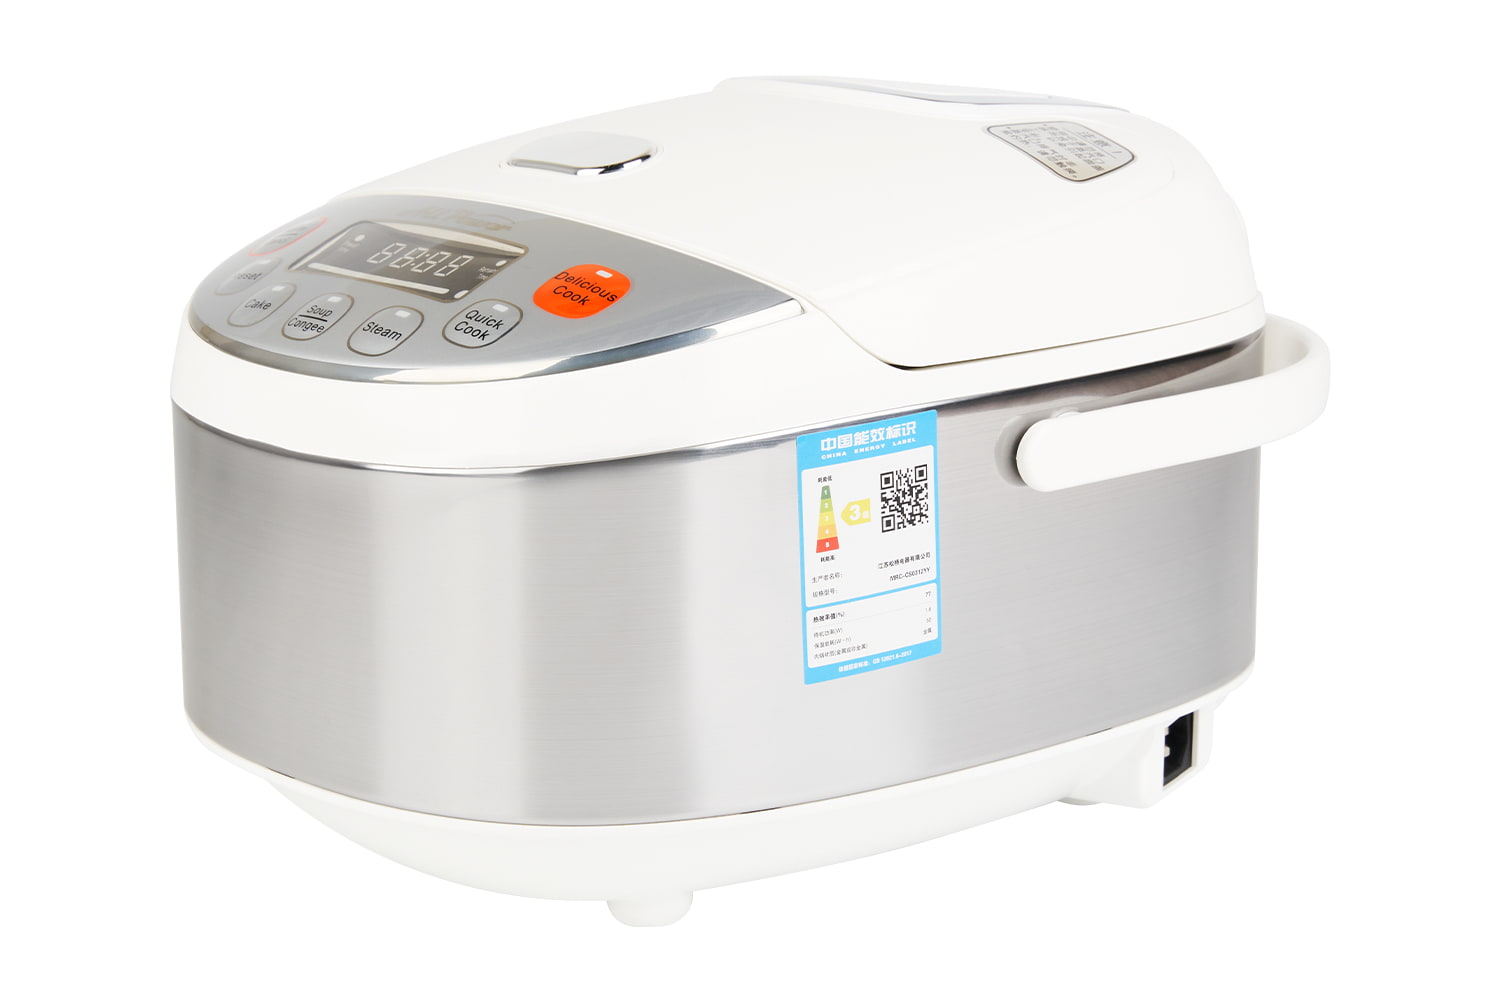 The Advantages of Buying a Rice Cooker